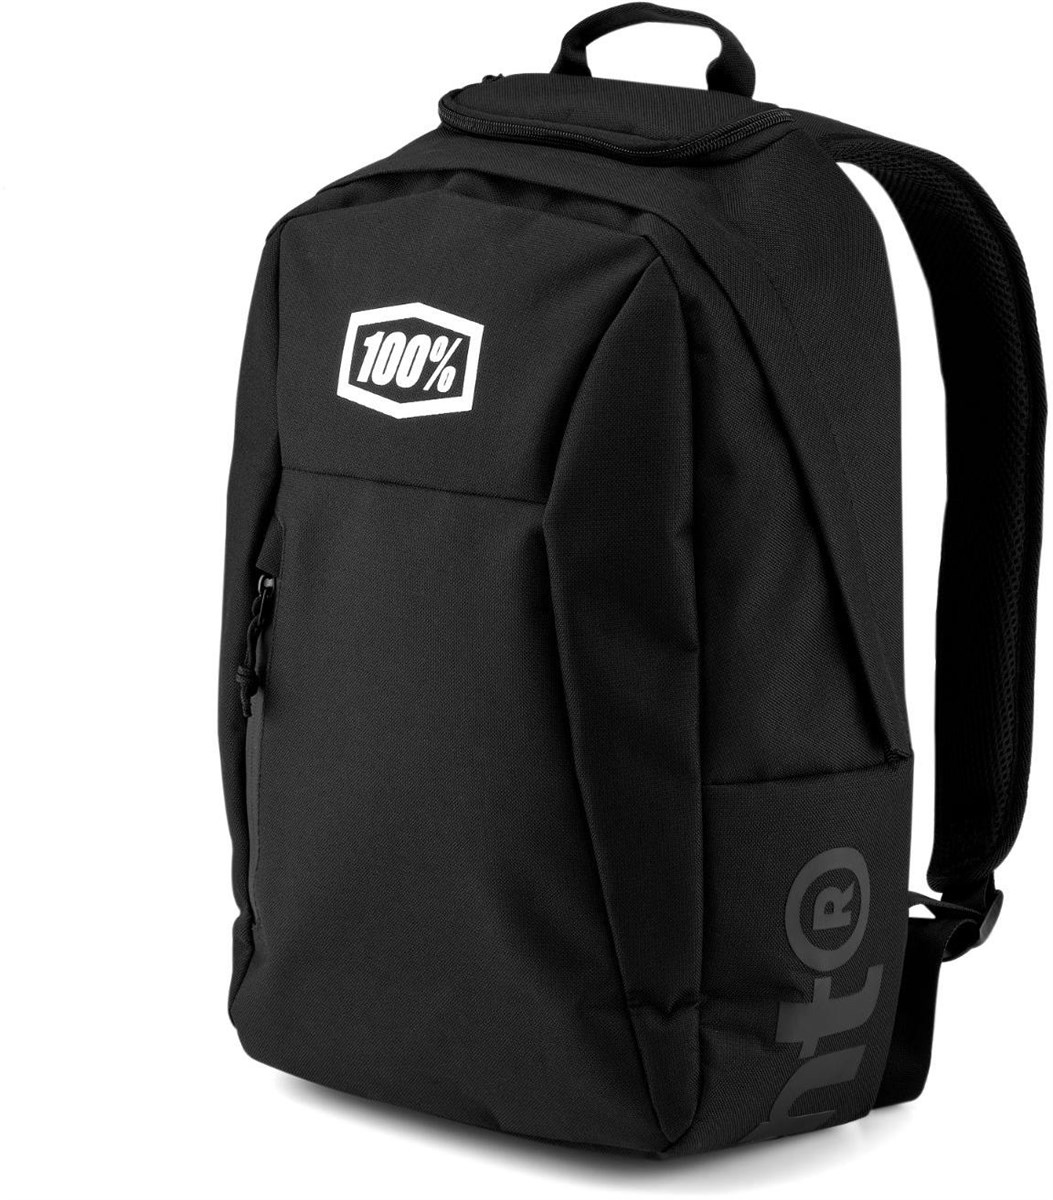 100% Skycap Backpack product image